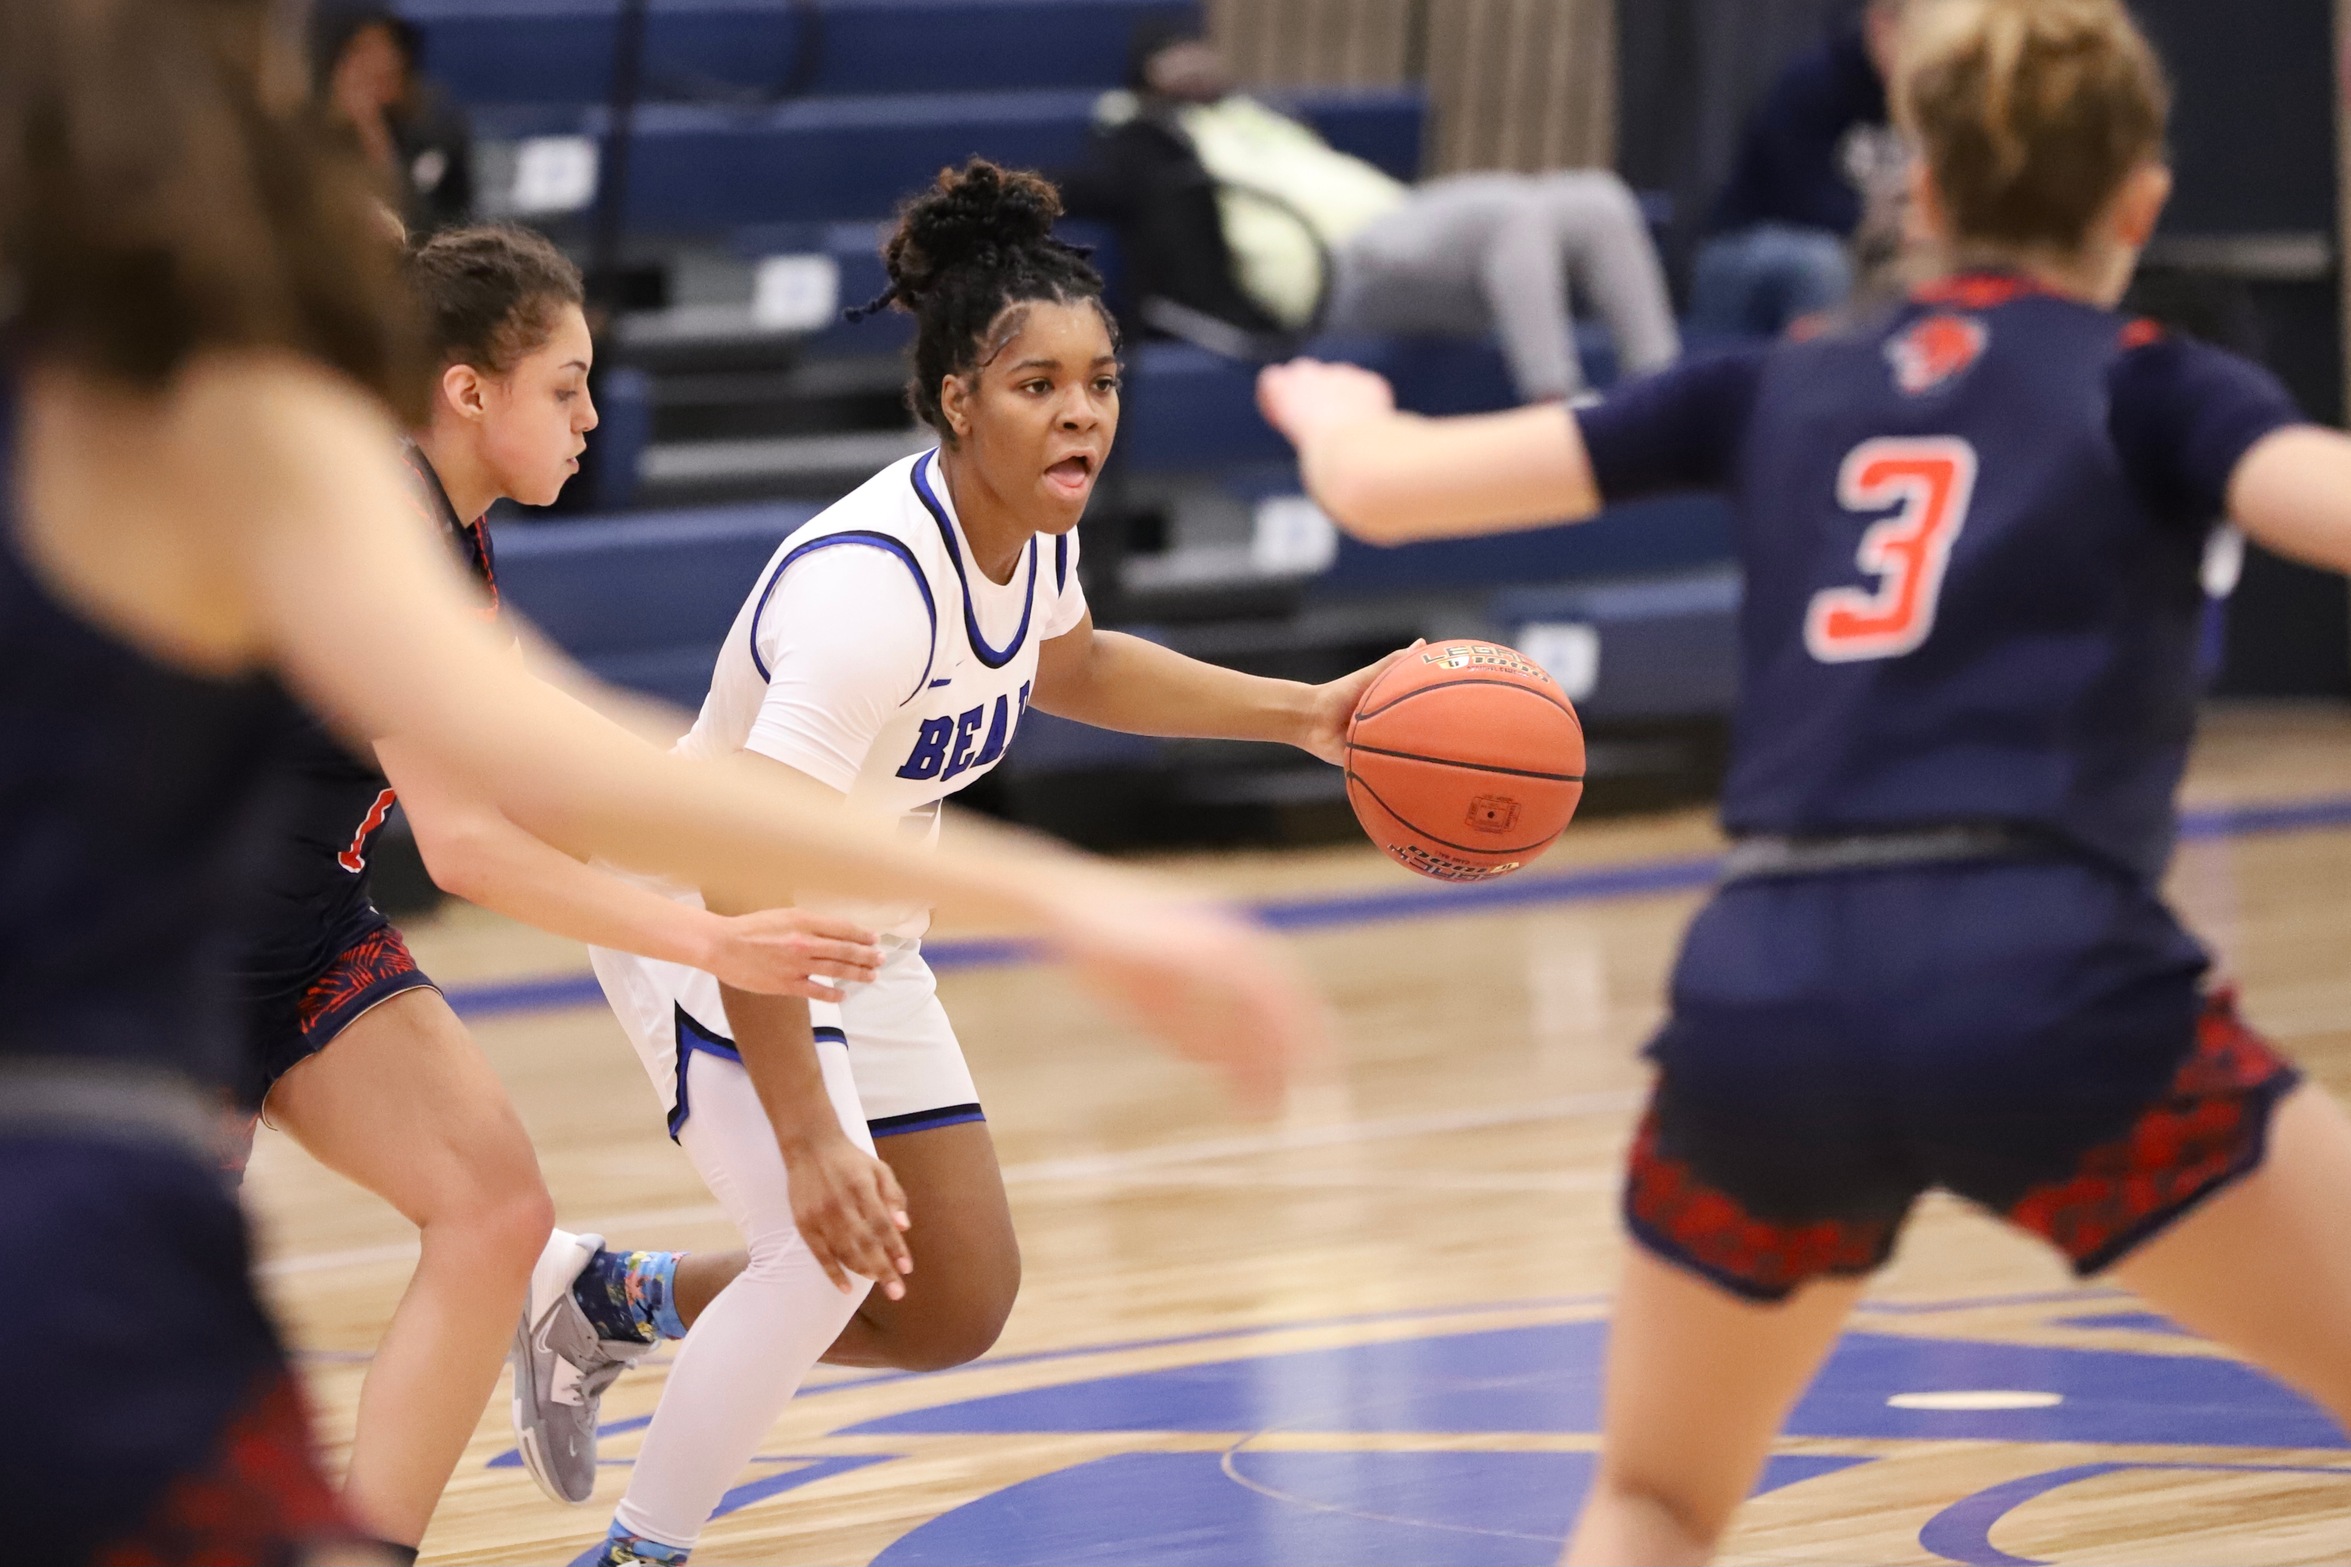 DMACC women's basketball team wins two games in Great Western Classic